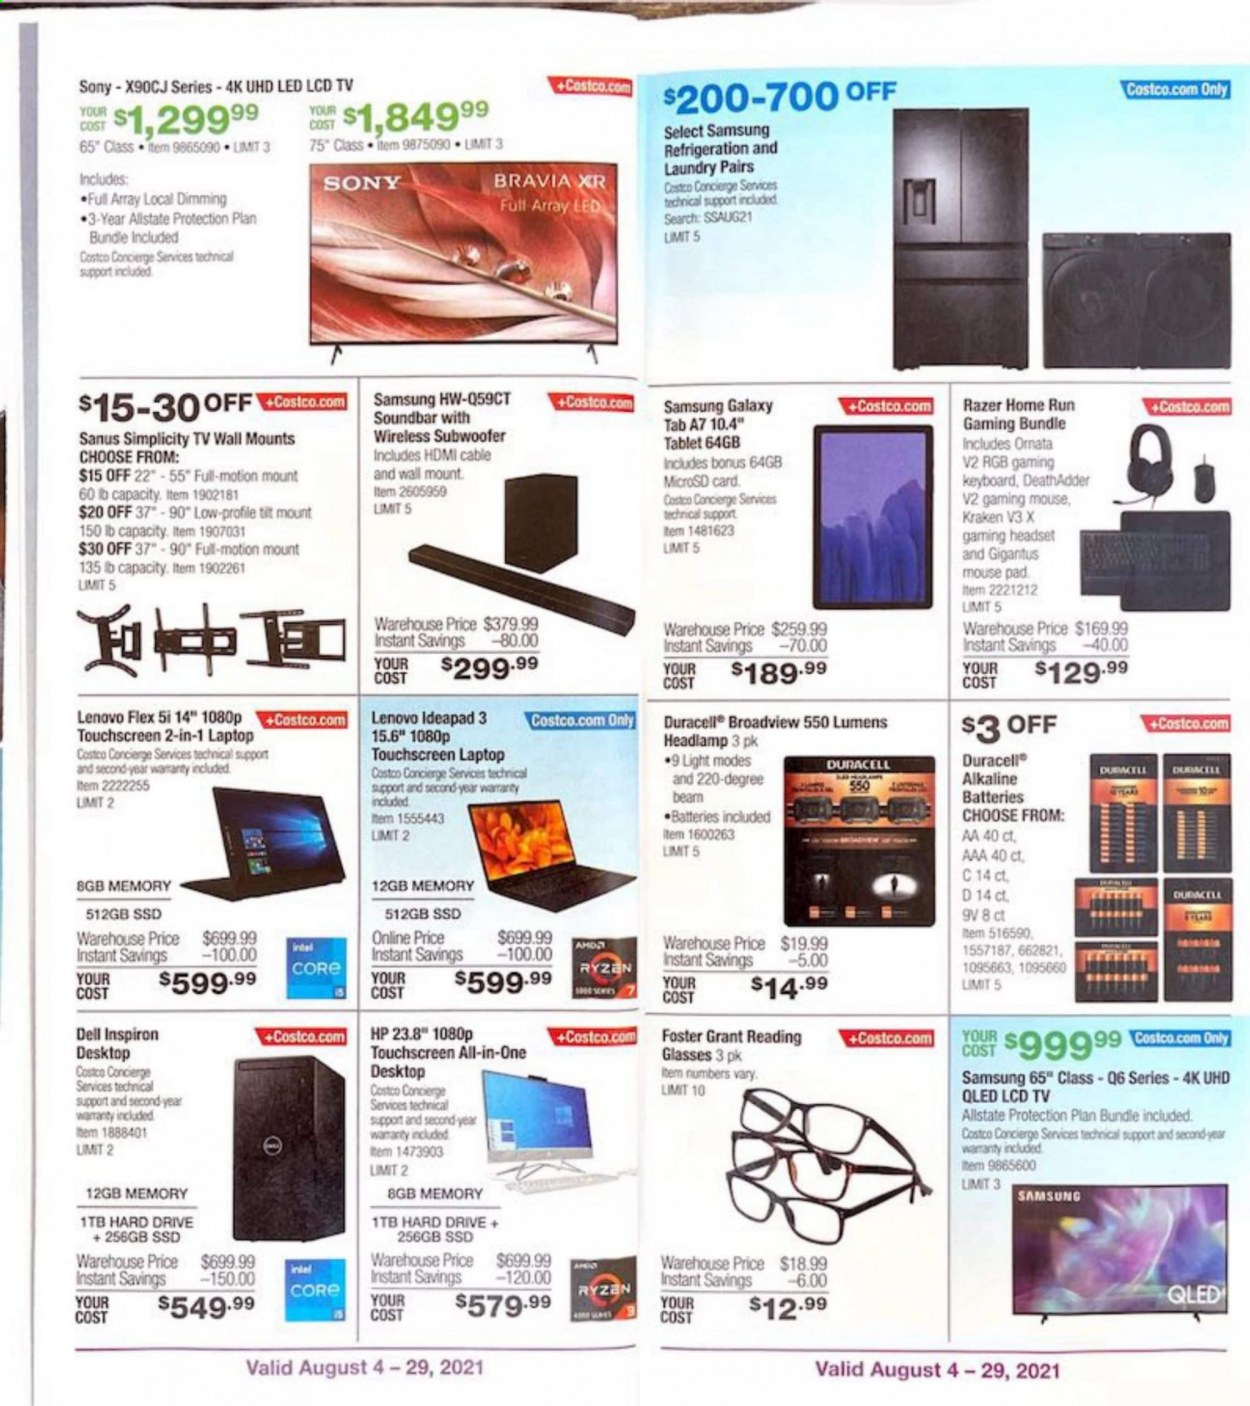 thumbnail - Costco Flyer - 08/04/2021 - 08/29/2021 - Sales products - gaming keyboard, gaming mouse, Razer, Sony, gaming headset, Dell, Intel, Lenovo, tablet, Hewlett Packard, Samsung Galaxy, Samsung Galaxy Tab, tea, Duracell, keyboard, mouse, Samsung, laptop, Inspiron, touchscreen laptop, Ryzen, hard disk, mouse pad, HDMI cable, TV, subwoofer, wireless subwoofer, sound bar, headset, headlamp. Page 6.